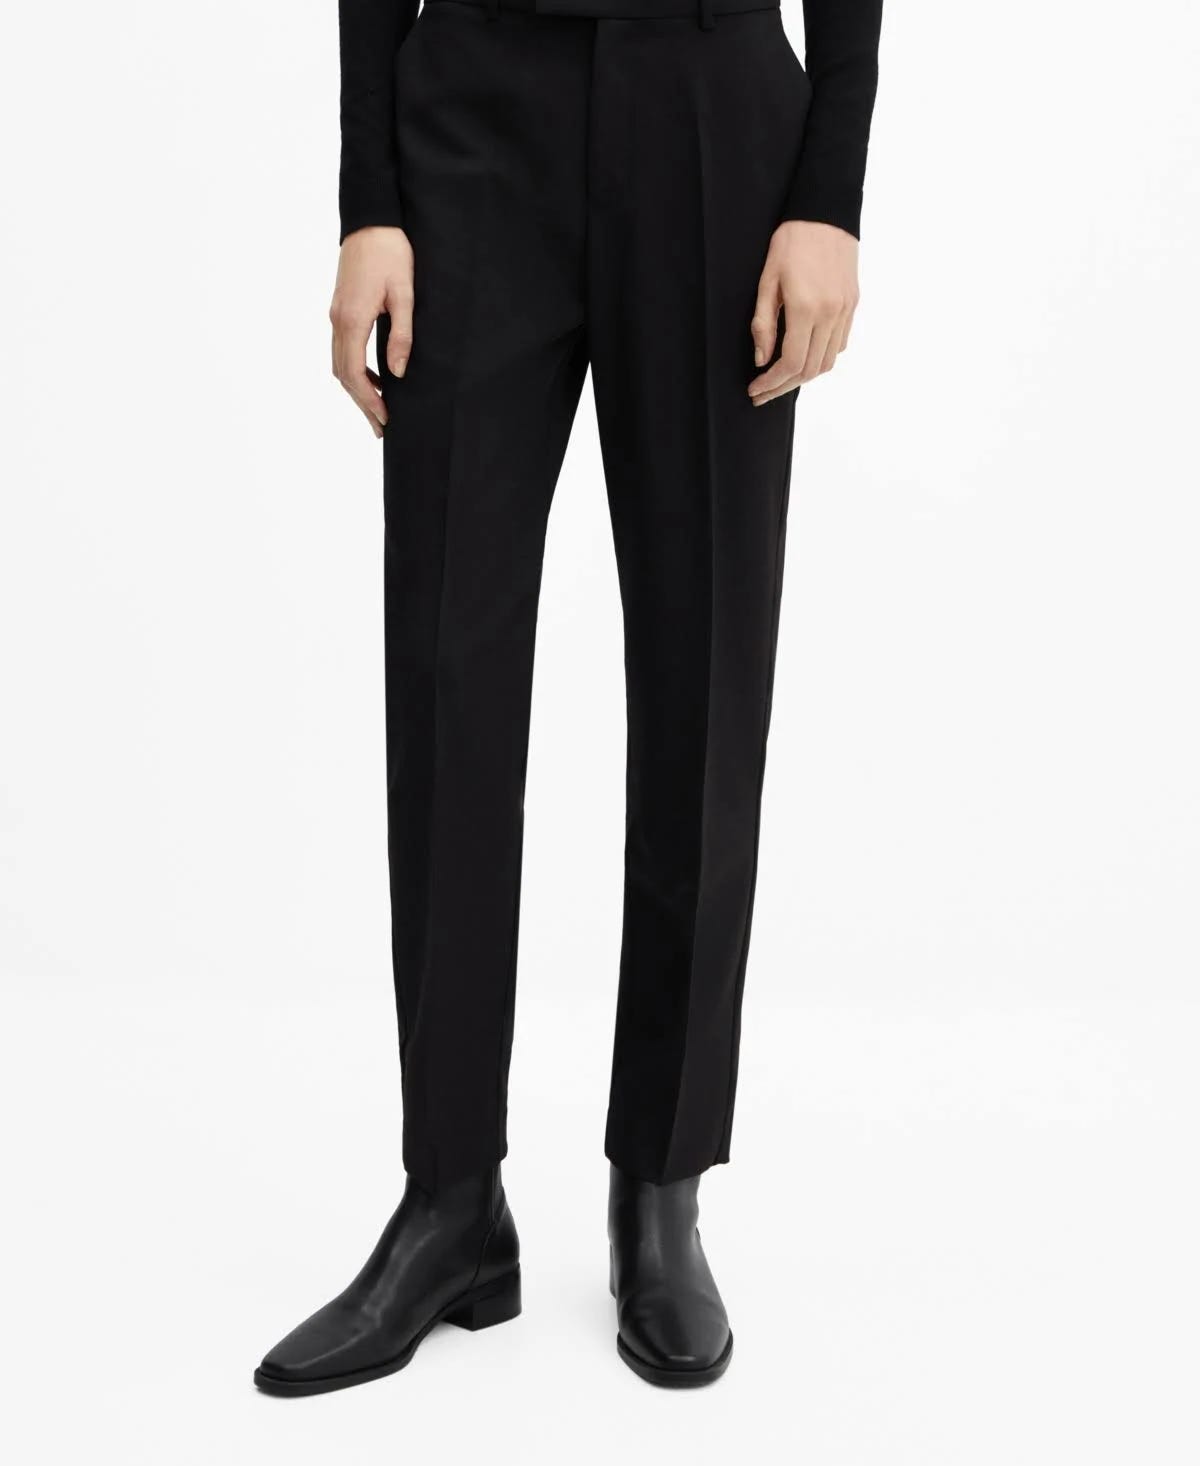 Black Straight Suit Pants for Women from Mango | Image